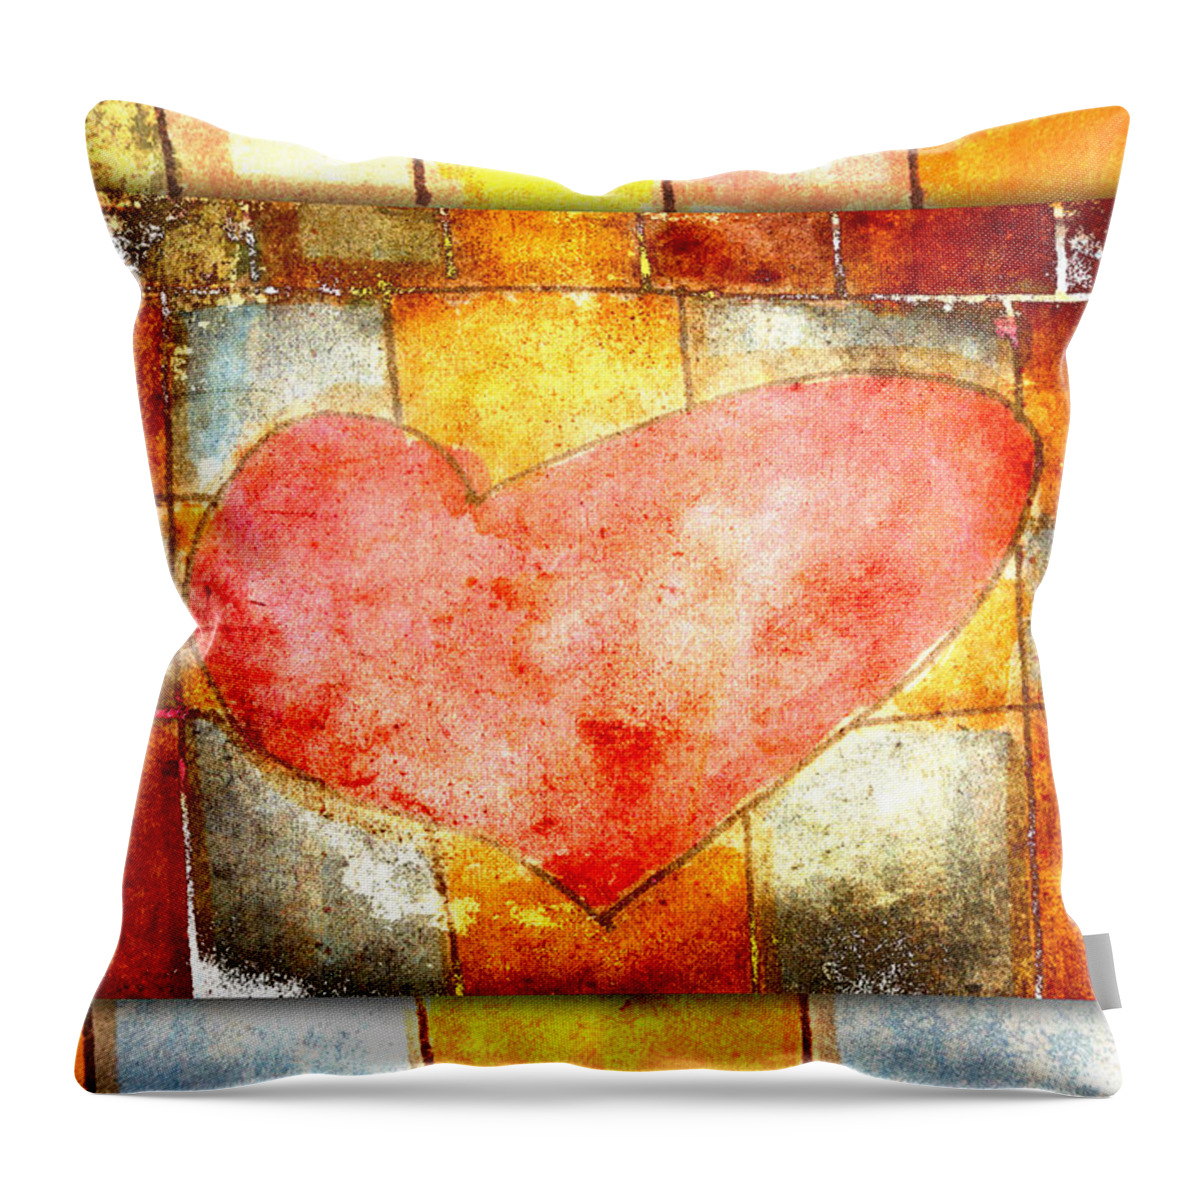 Heart Throw Pillow featuring the photograph Squared Heart by Carol Leigh